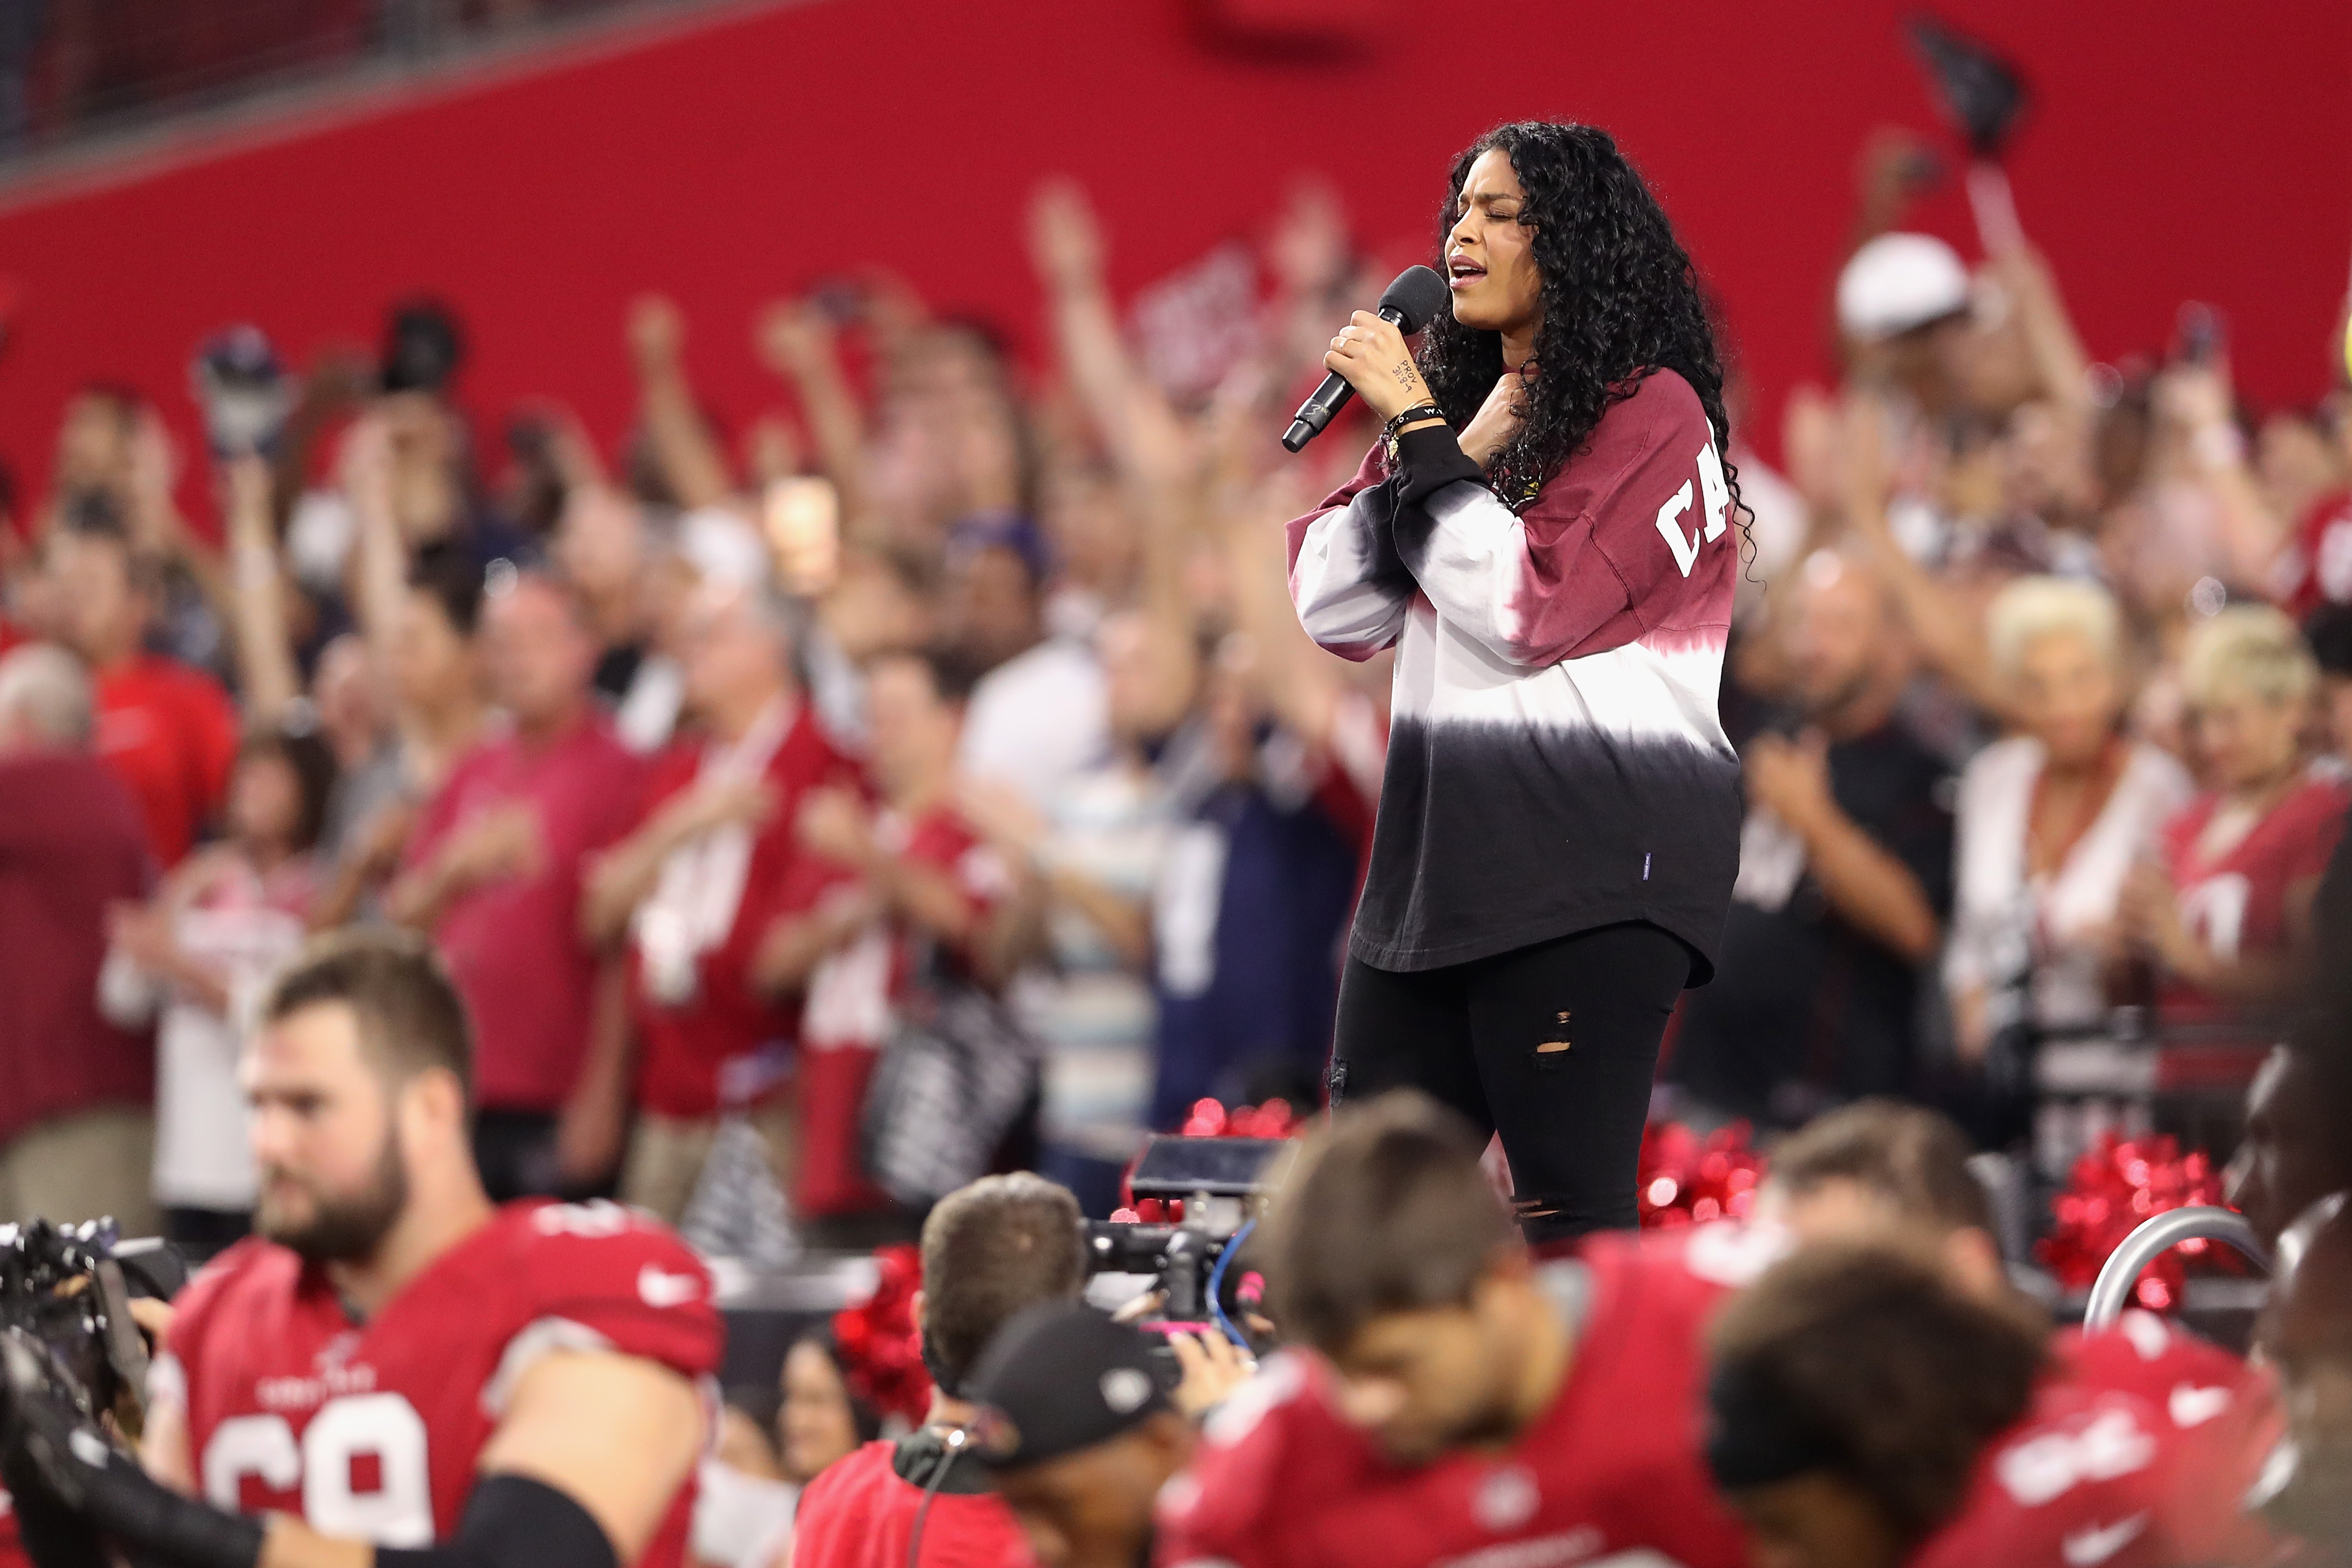 GLENDALE, AZ - SEPTEMBER 25:  Singer Jordin Sparks performs the National Anthem before the start of the  the NFL game between the Arizona Cardinals and the Dallas Cowboys at the University of Phoenix Stadium on September 25, 2017 in Glendale, Arizona.  (Photo by Christian Petersen/Getty Images) (Christian Petersen&mdash;Getty Images)